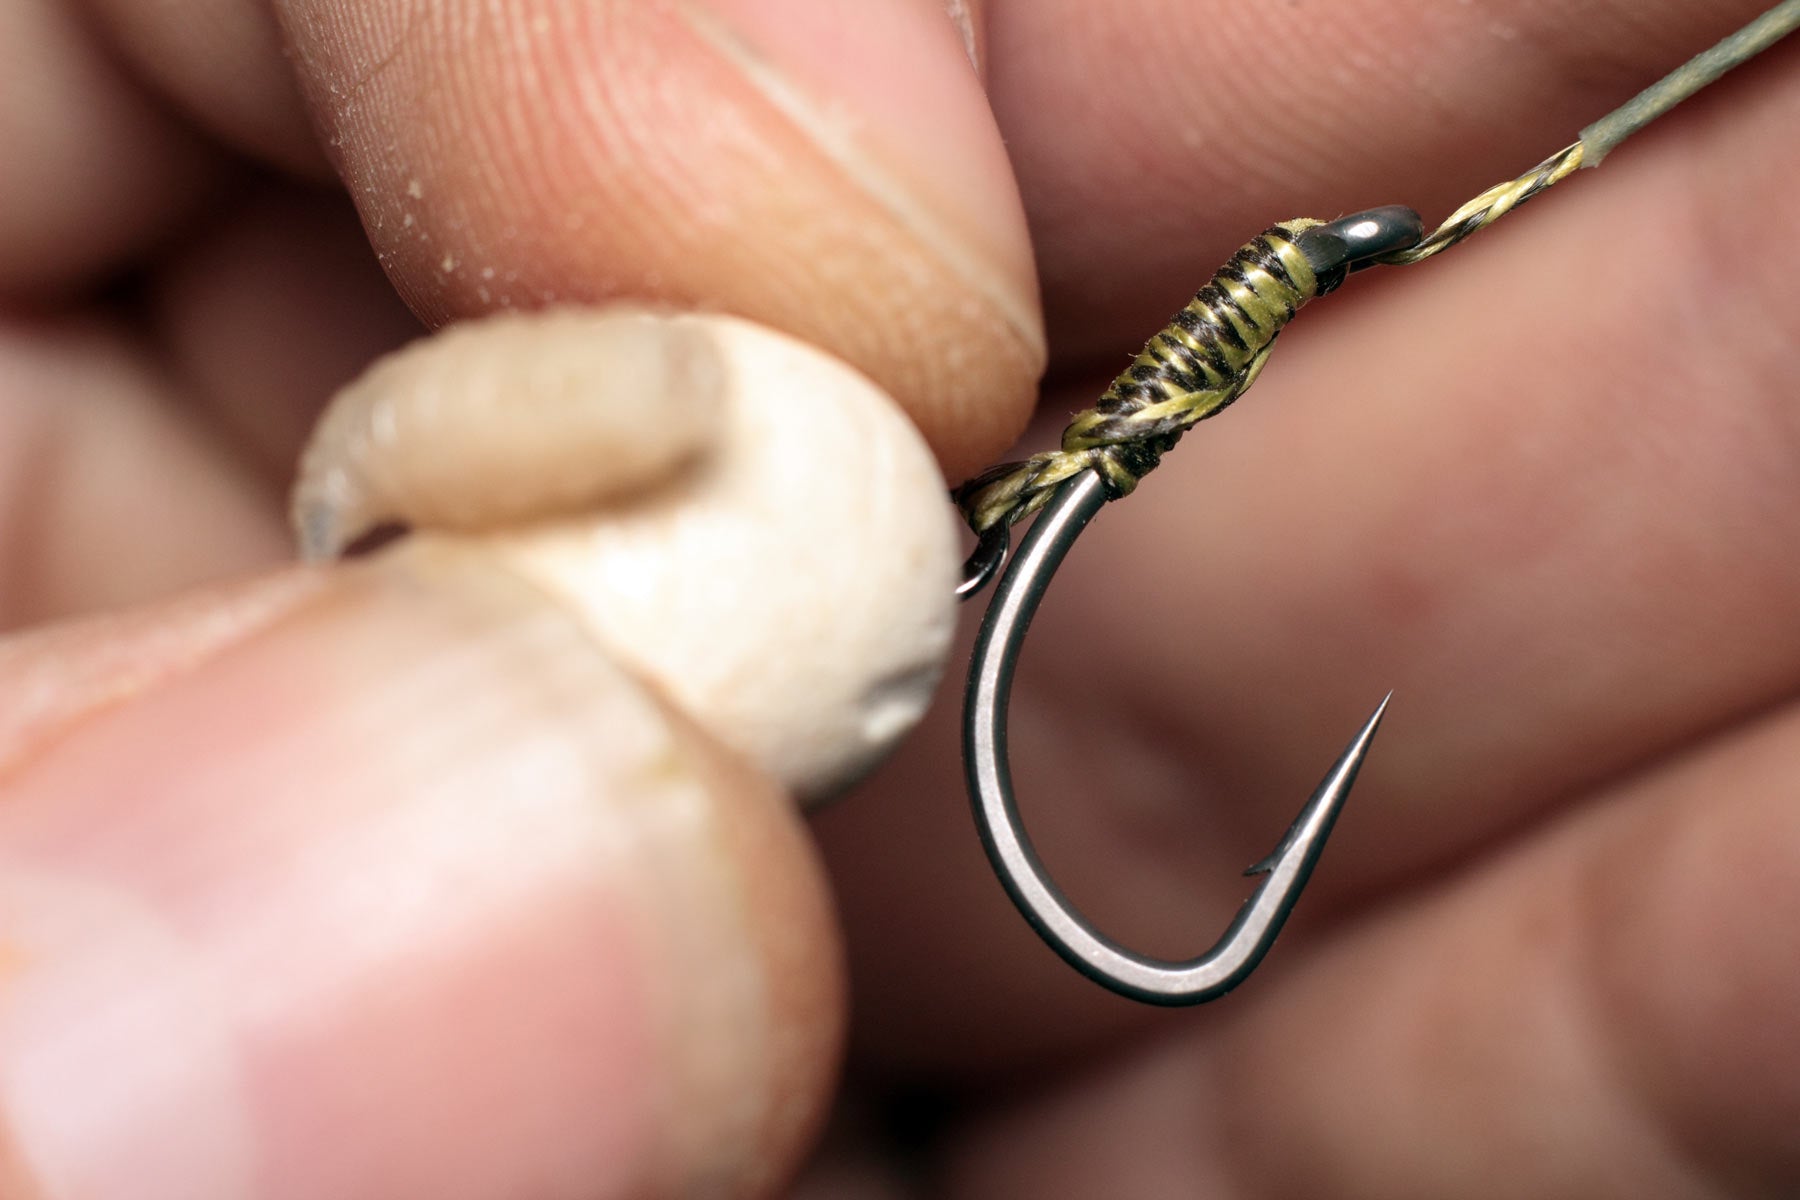 A winter winner: Using maggots with the Horton rig